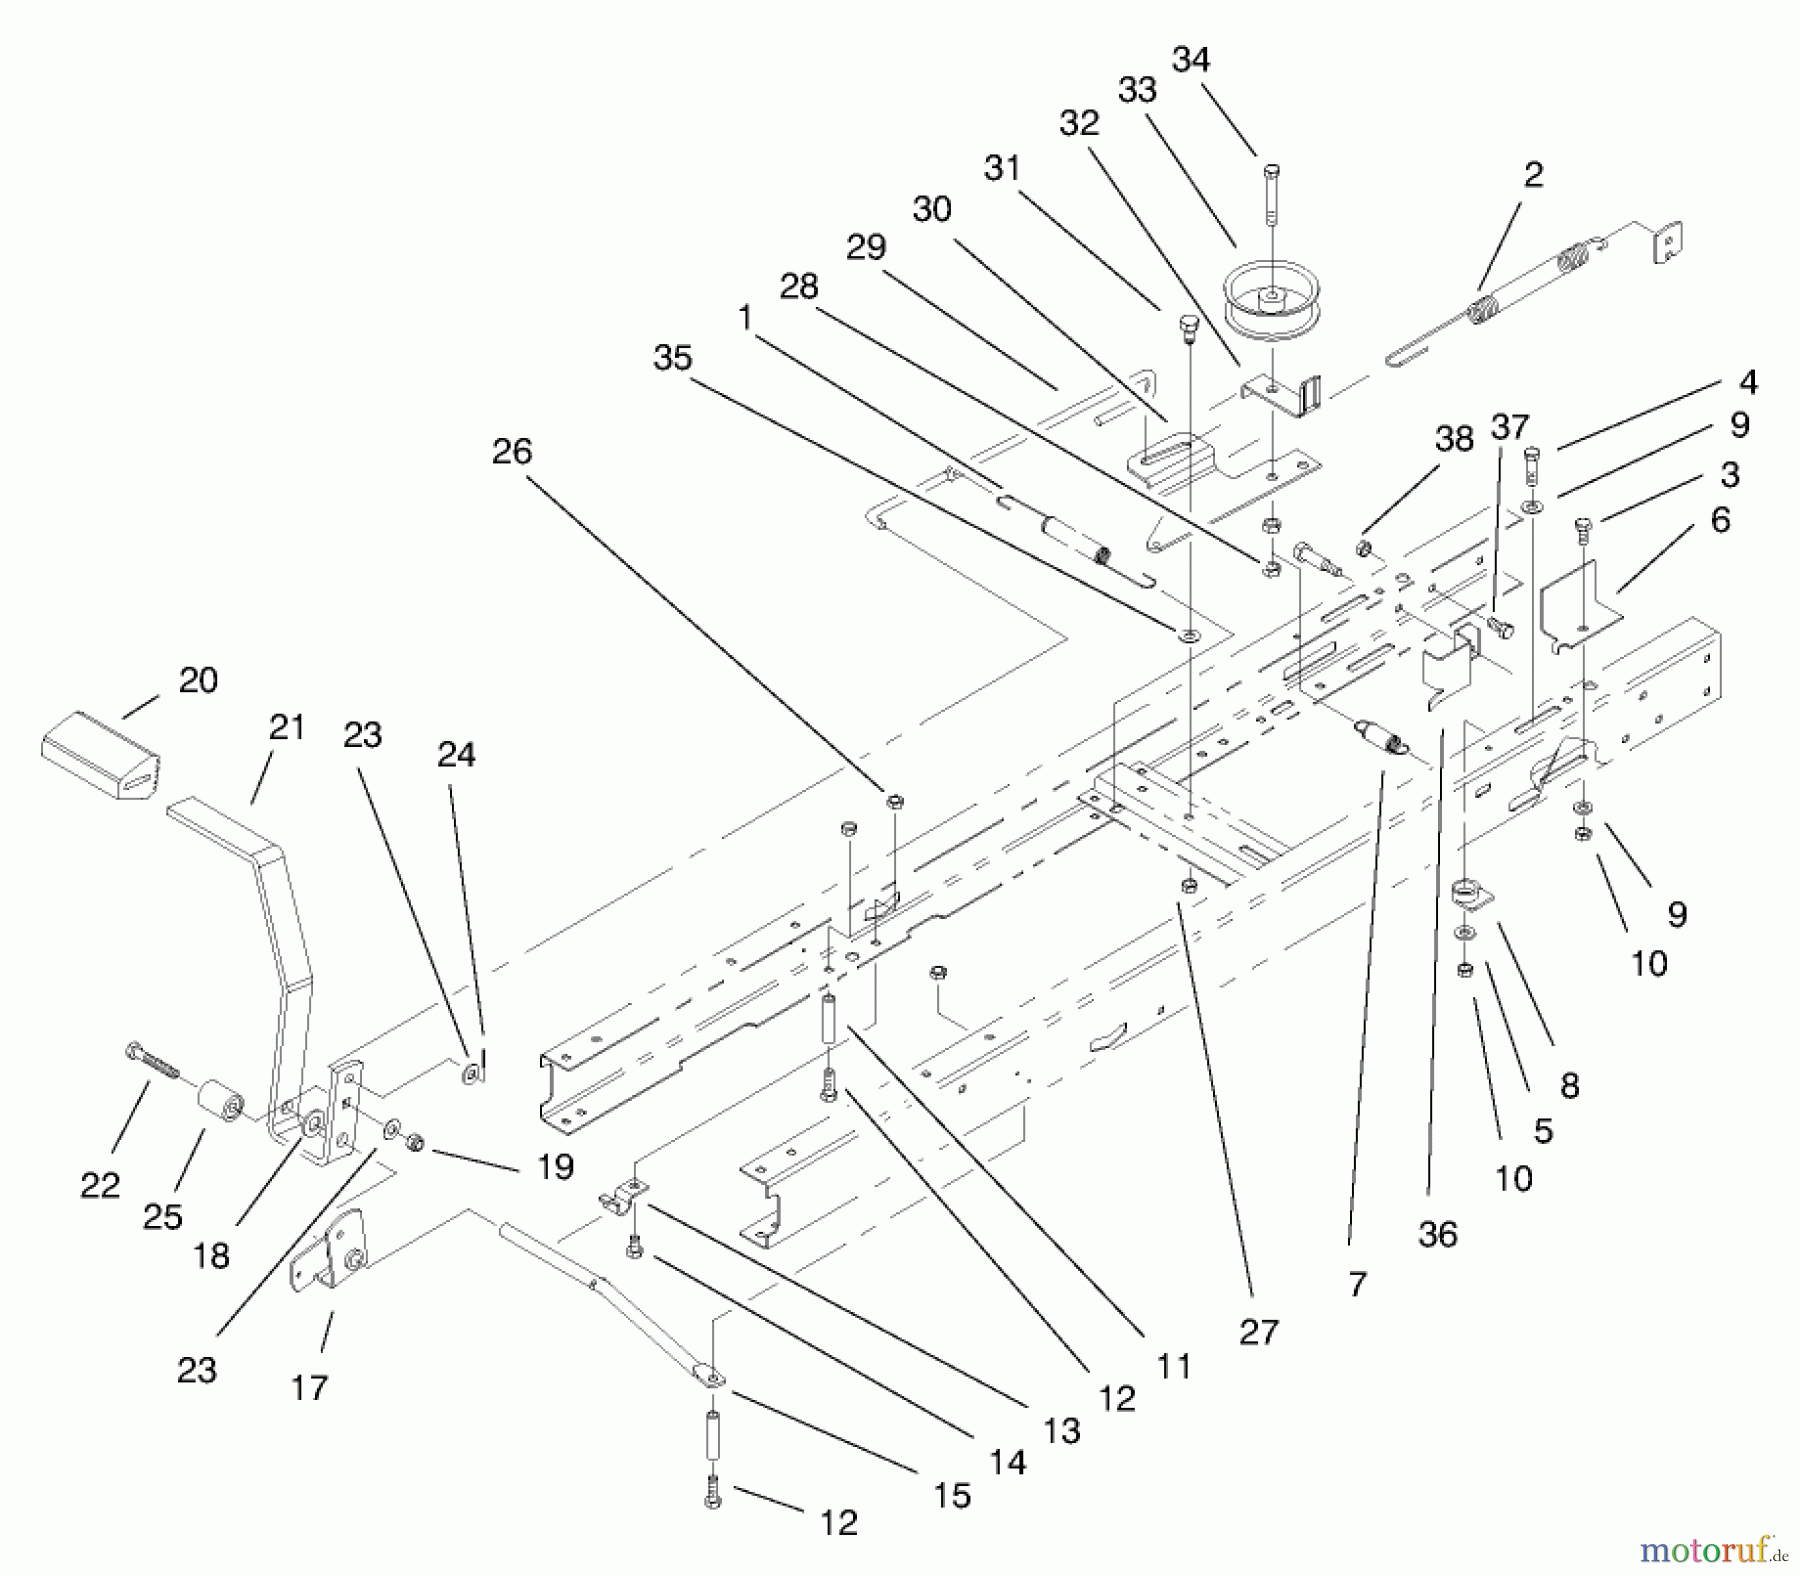  Toro Neu Mowers, Lawn & Garden Tractor Seite 1 71209 (13-32XLE) - Toro 13-32XLE Lawn Tractor, 2000 (200000001-200999999) TRACTION CLUTCHING COMPONENTS ASSEMBLY